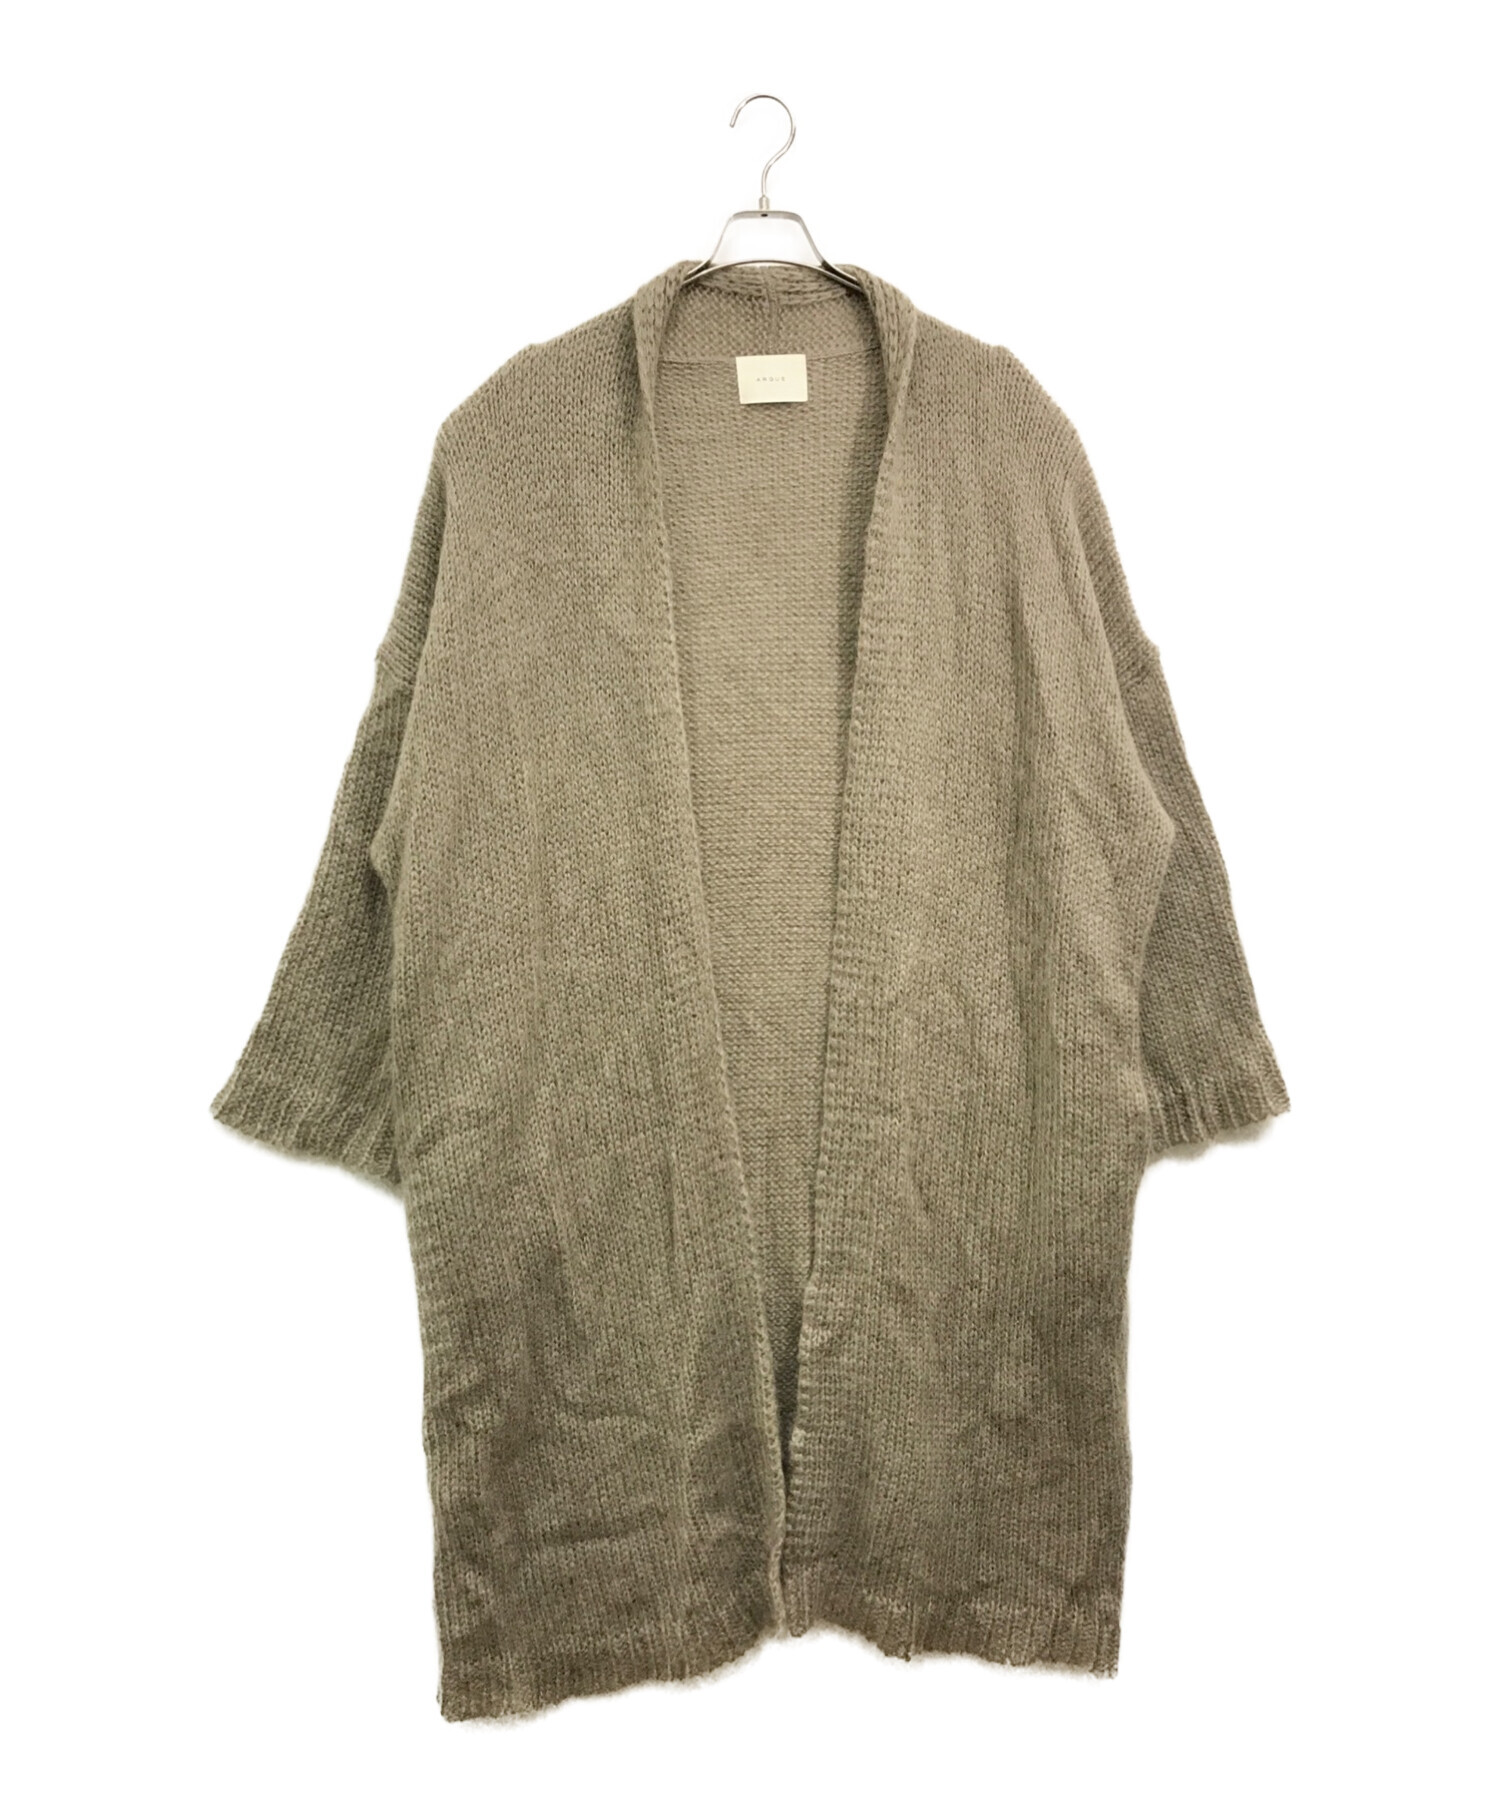 Lowgauge Knit Gown ローゲージニットガウン 人気品URBANRESEARCH